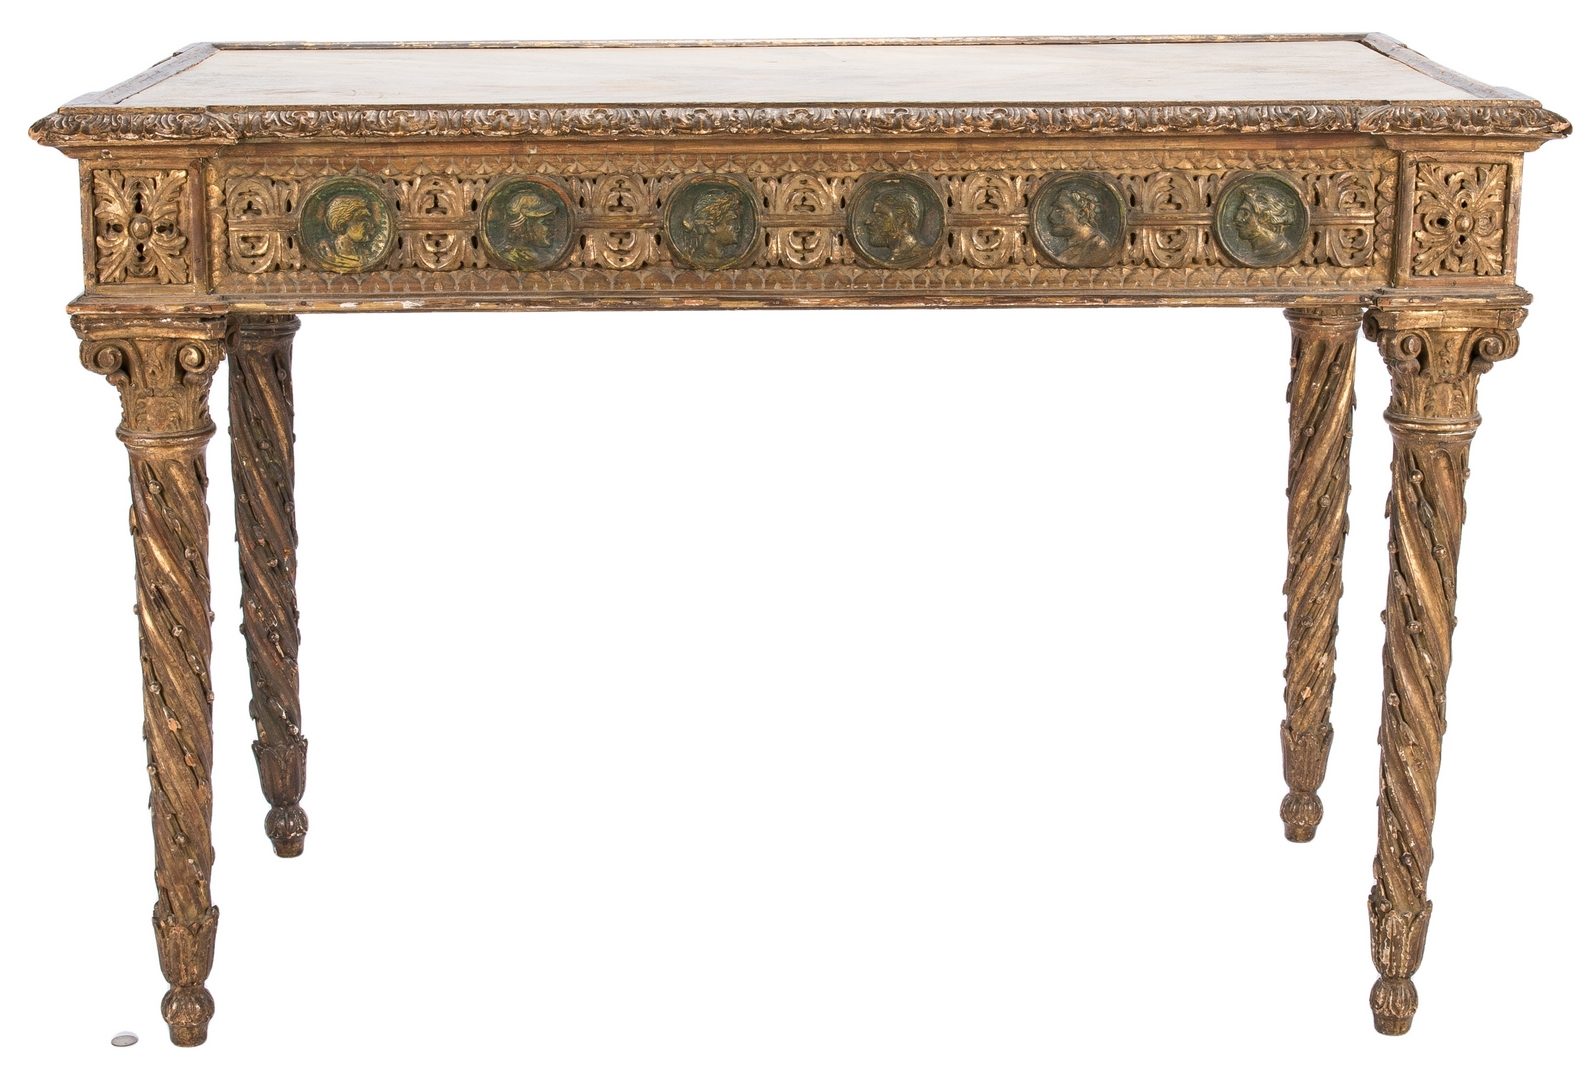 Lot 276: Italian Baroque style Carved Writing or Pier Table